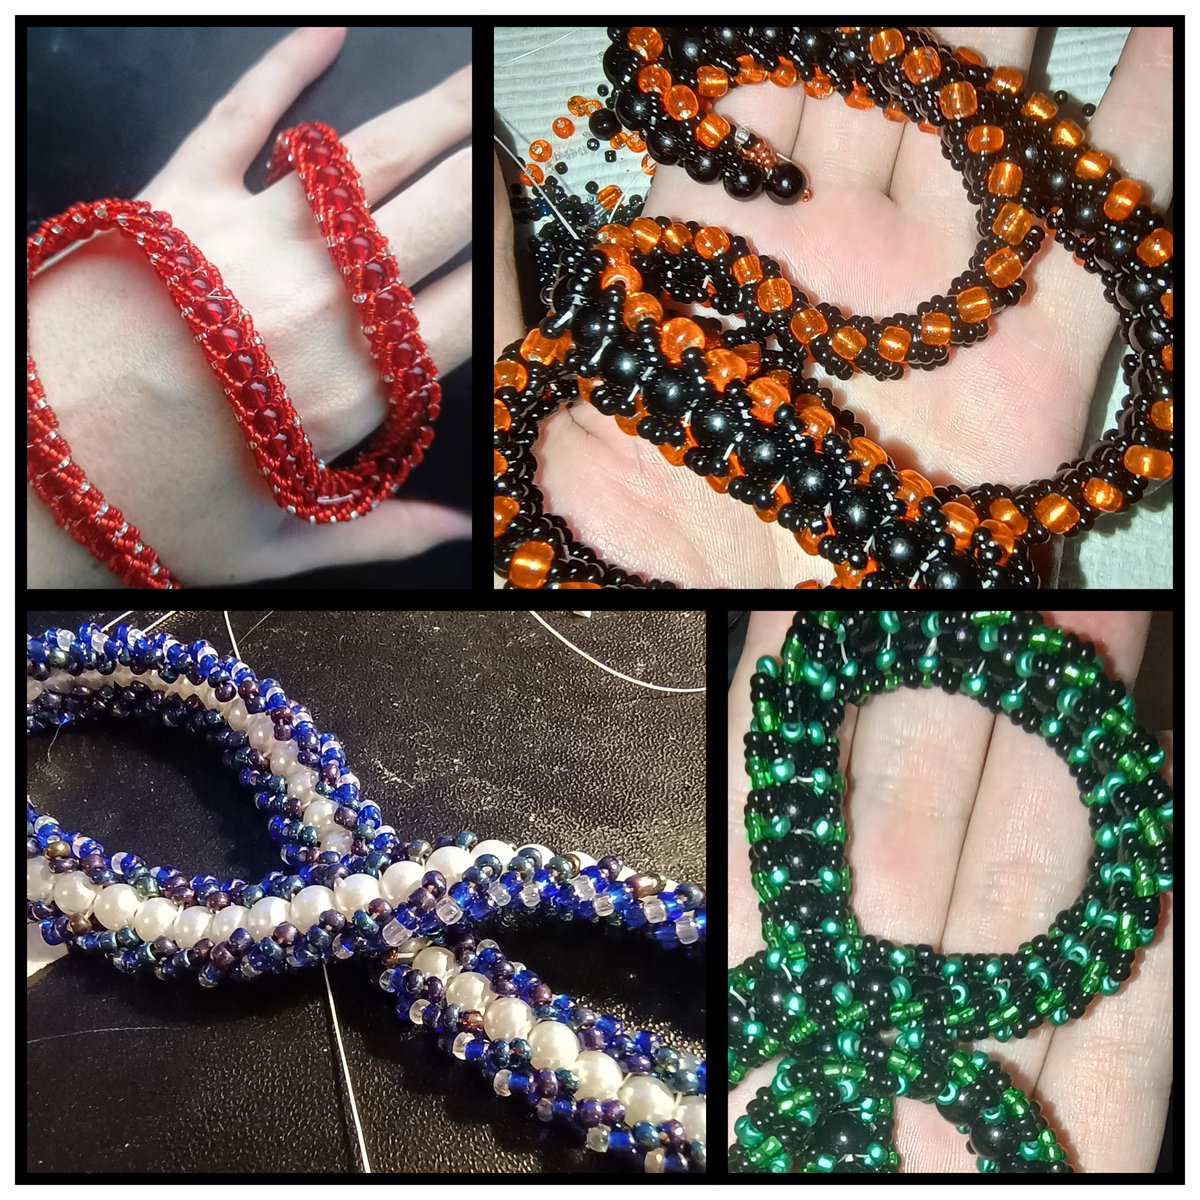 Some of my best work 🖤 One gifted, one sold, and two of my personal collection.
FIGJAM. 
#beadweaving #artistsontwitter